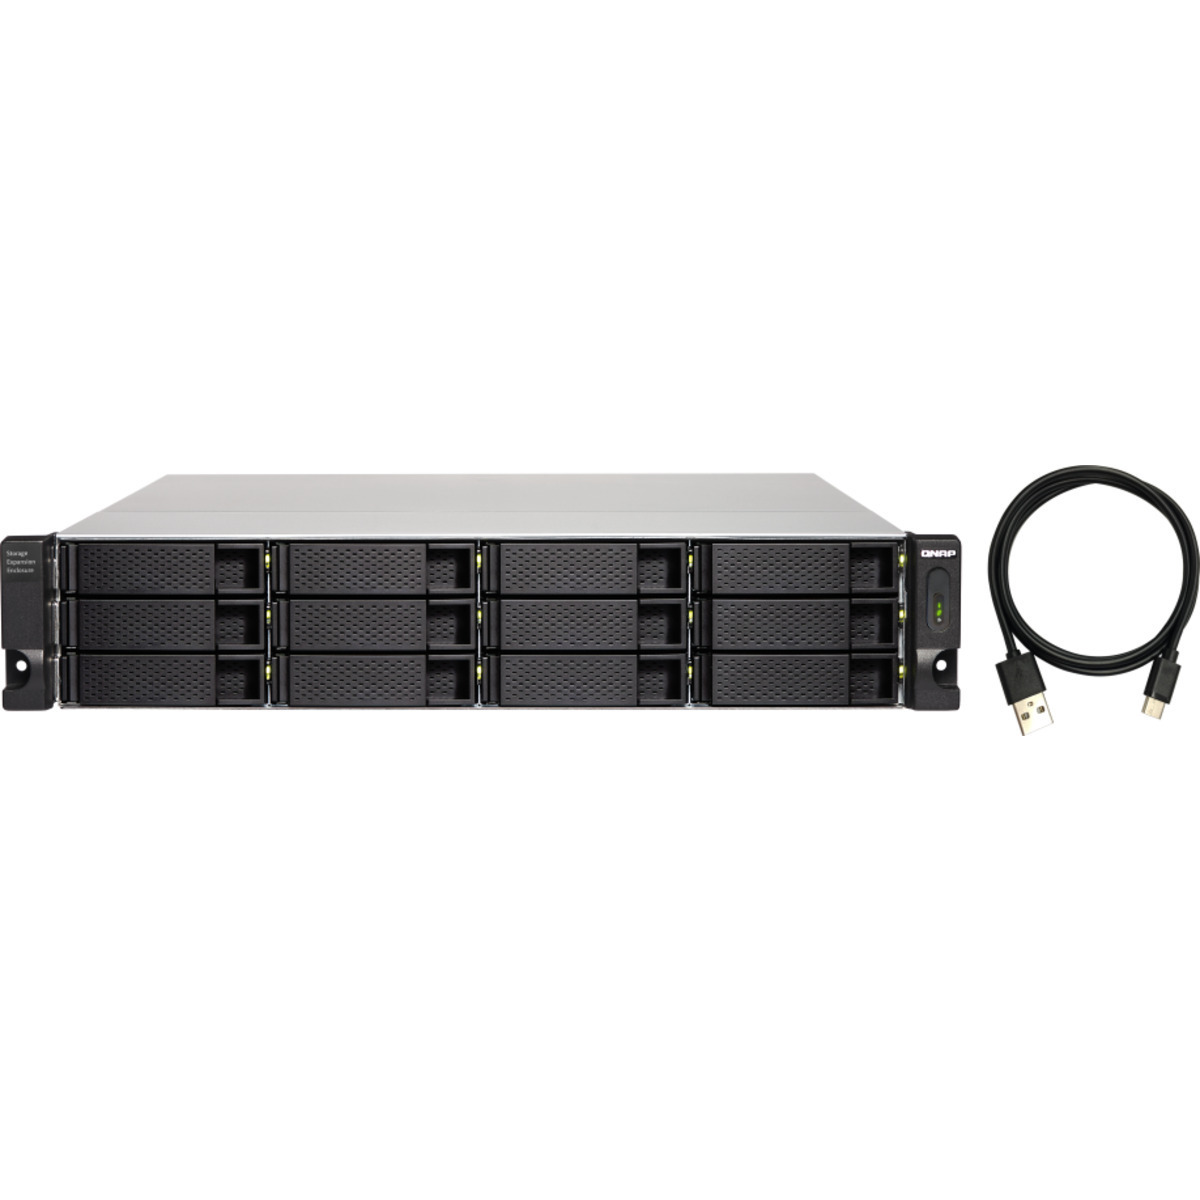 QNAP TL-R1200C-RP External Expansion Drive 140tb 12-Bay RackMount Multimedia / Power User / Business Expansion Enclosure 7x20tb Seagate IronWolf Pro ST20000NT001 3.5 7200rpm SATA 6Gb/s HDD NAS Class Drives Installed - Burn-In Tested TL-R1200C-RP External Expansion Drive